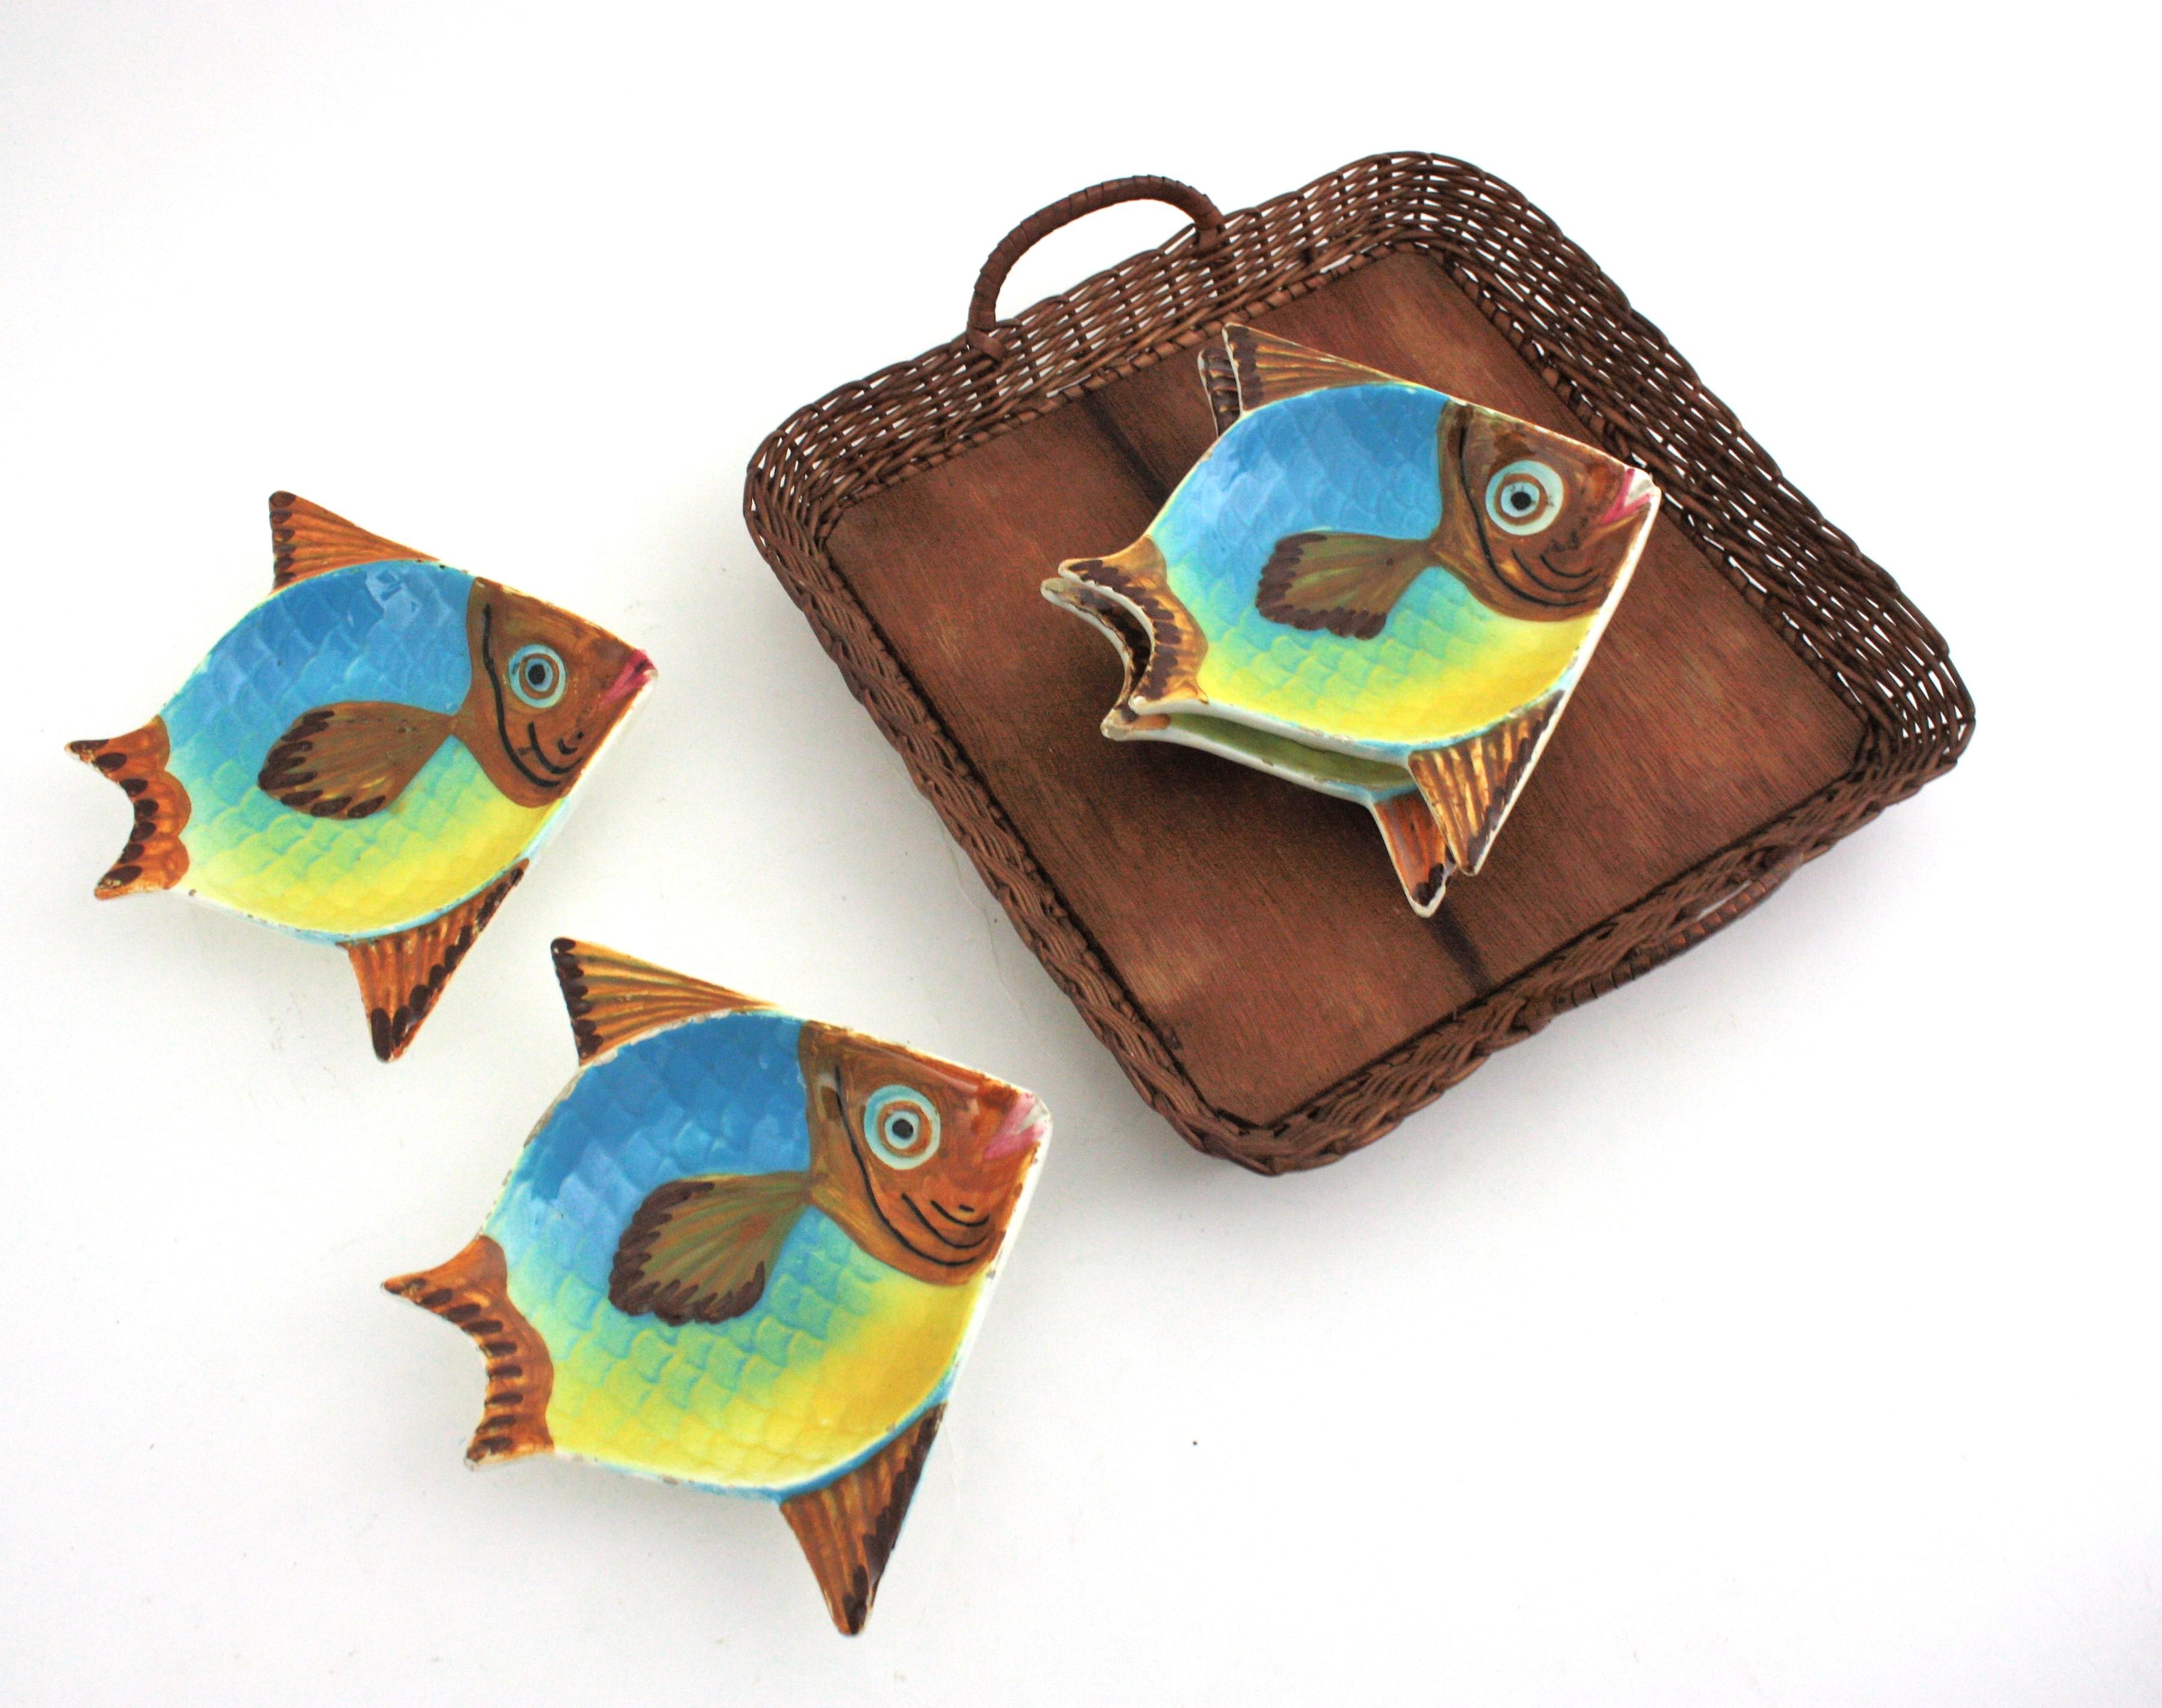 Spanish Ceramic Fish Bowls and Rattan Tray Snacks Set For Sale 3